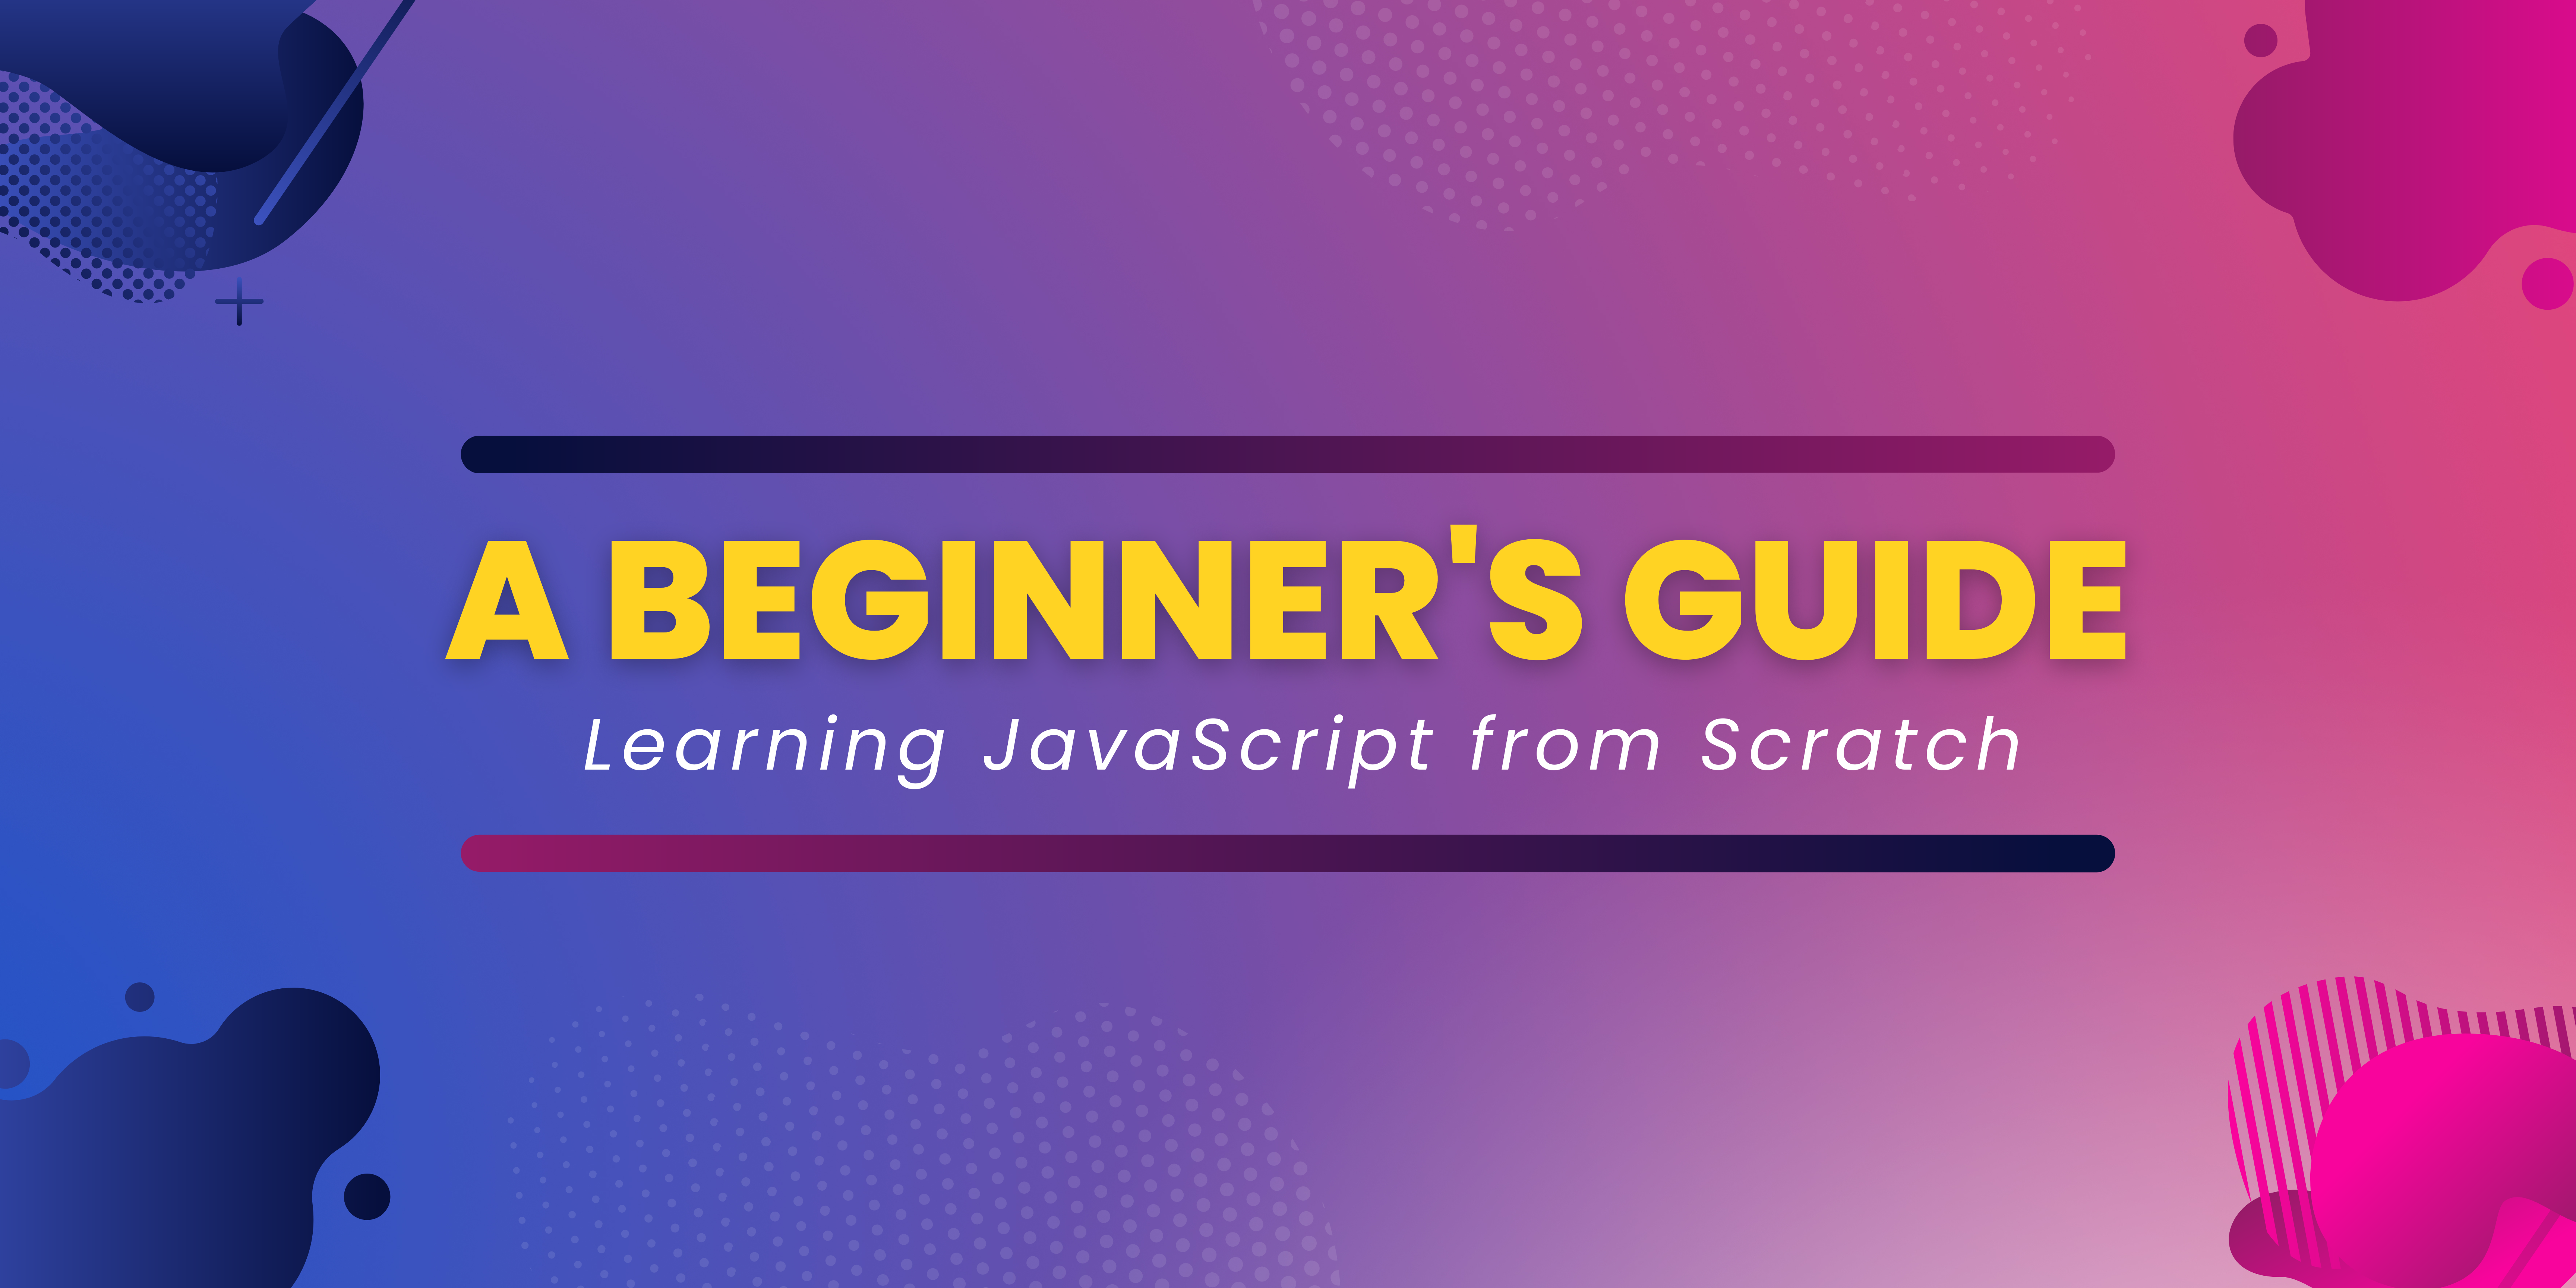 Learning JavaScript from Scratch: A Beginner's Guide